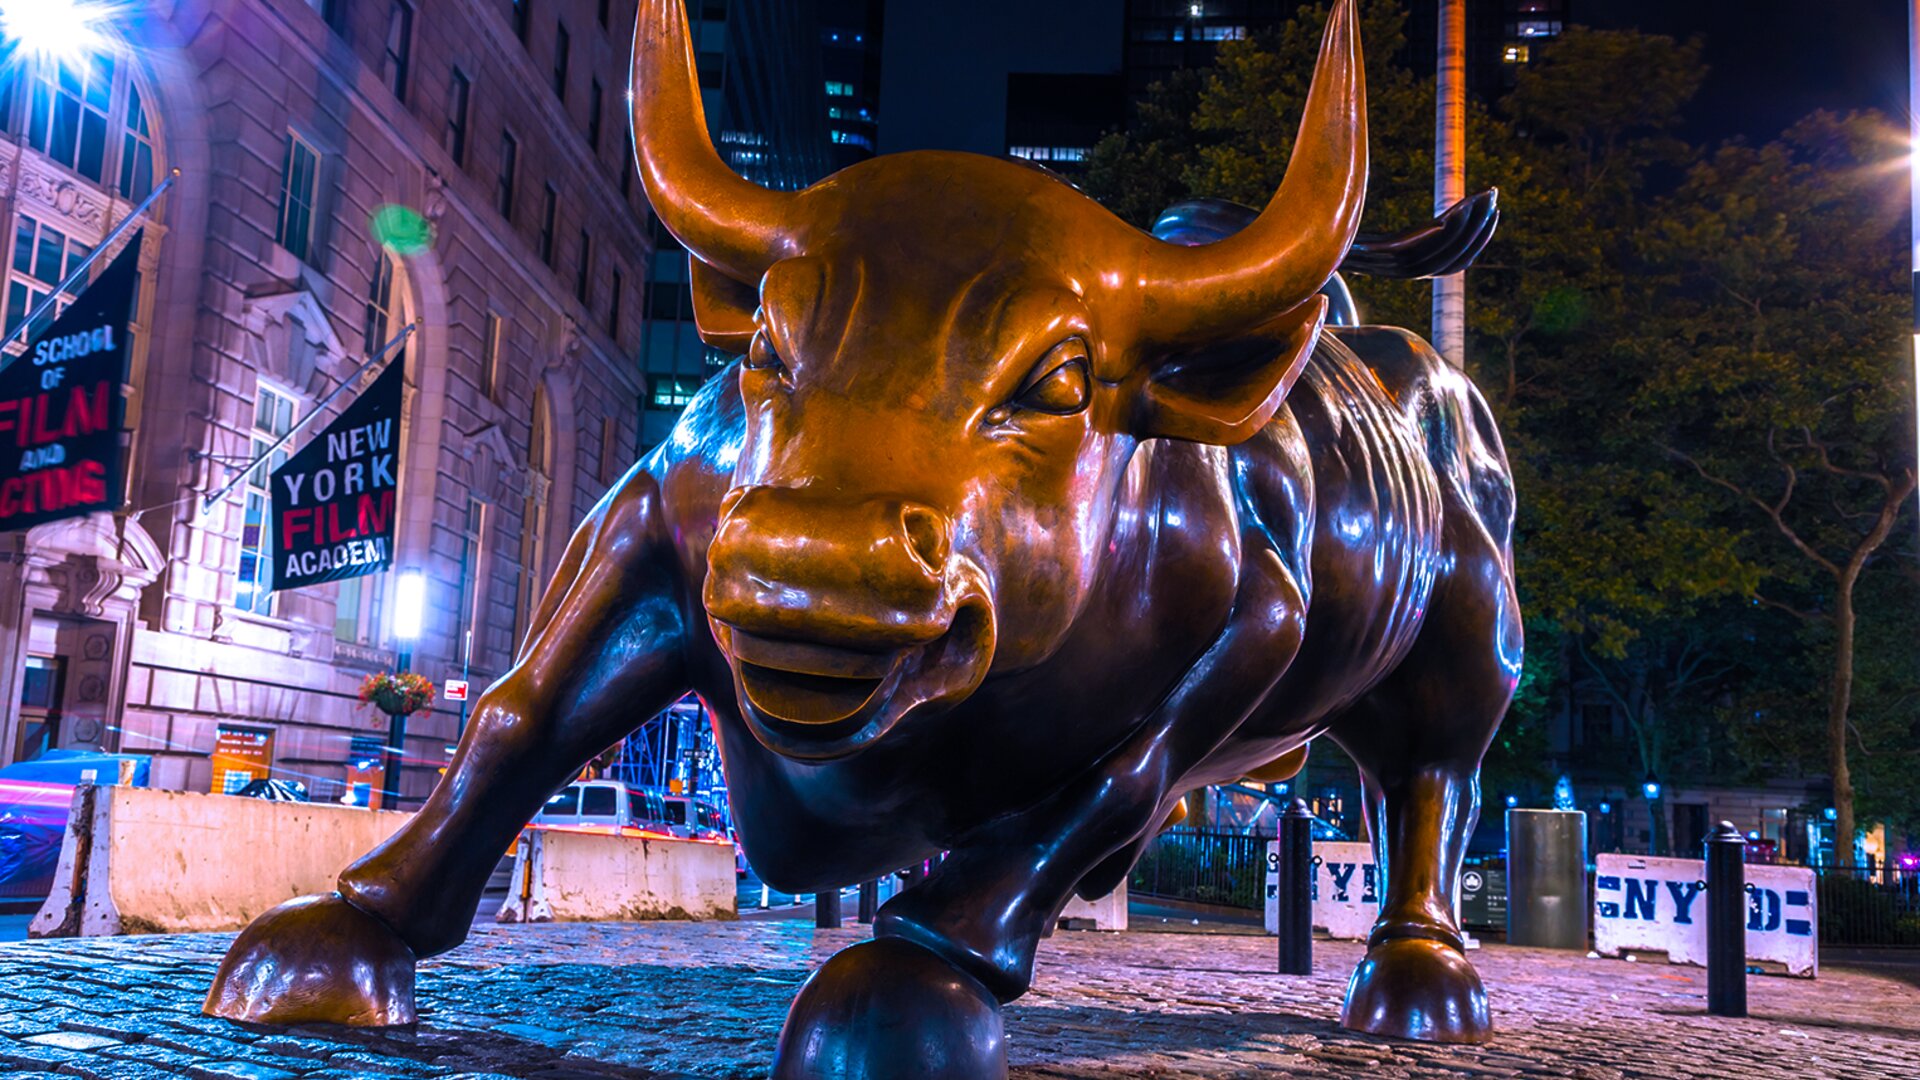 The market bull on Wall Street in NYC